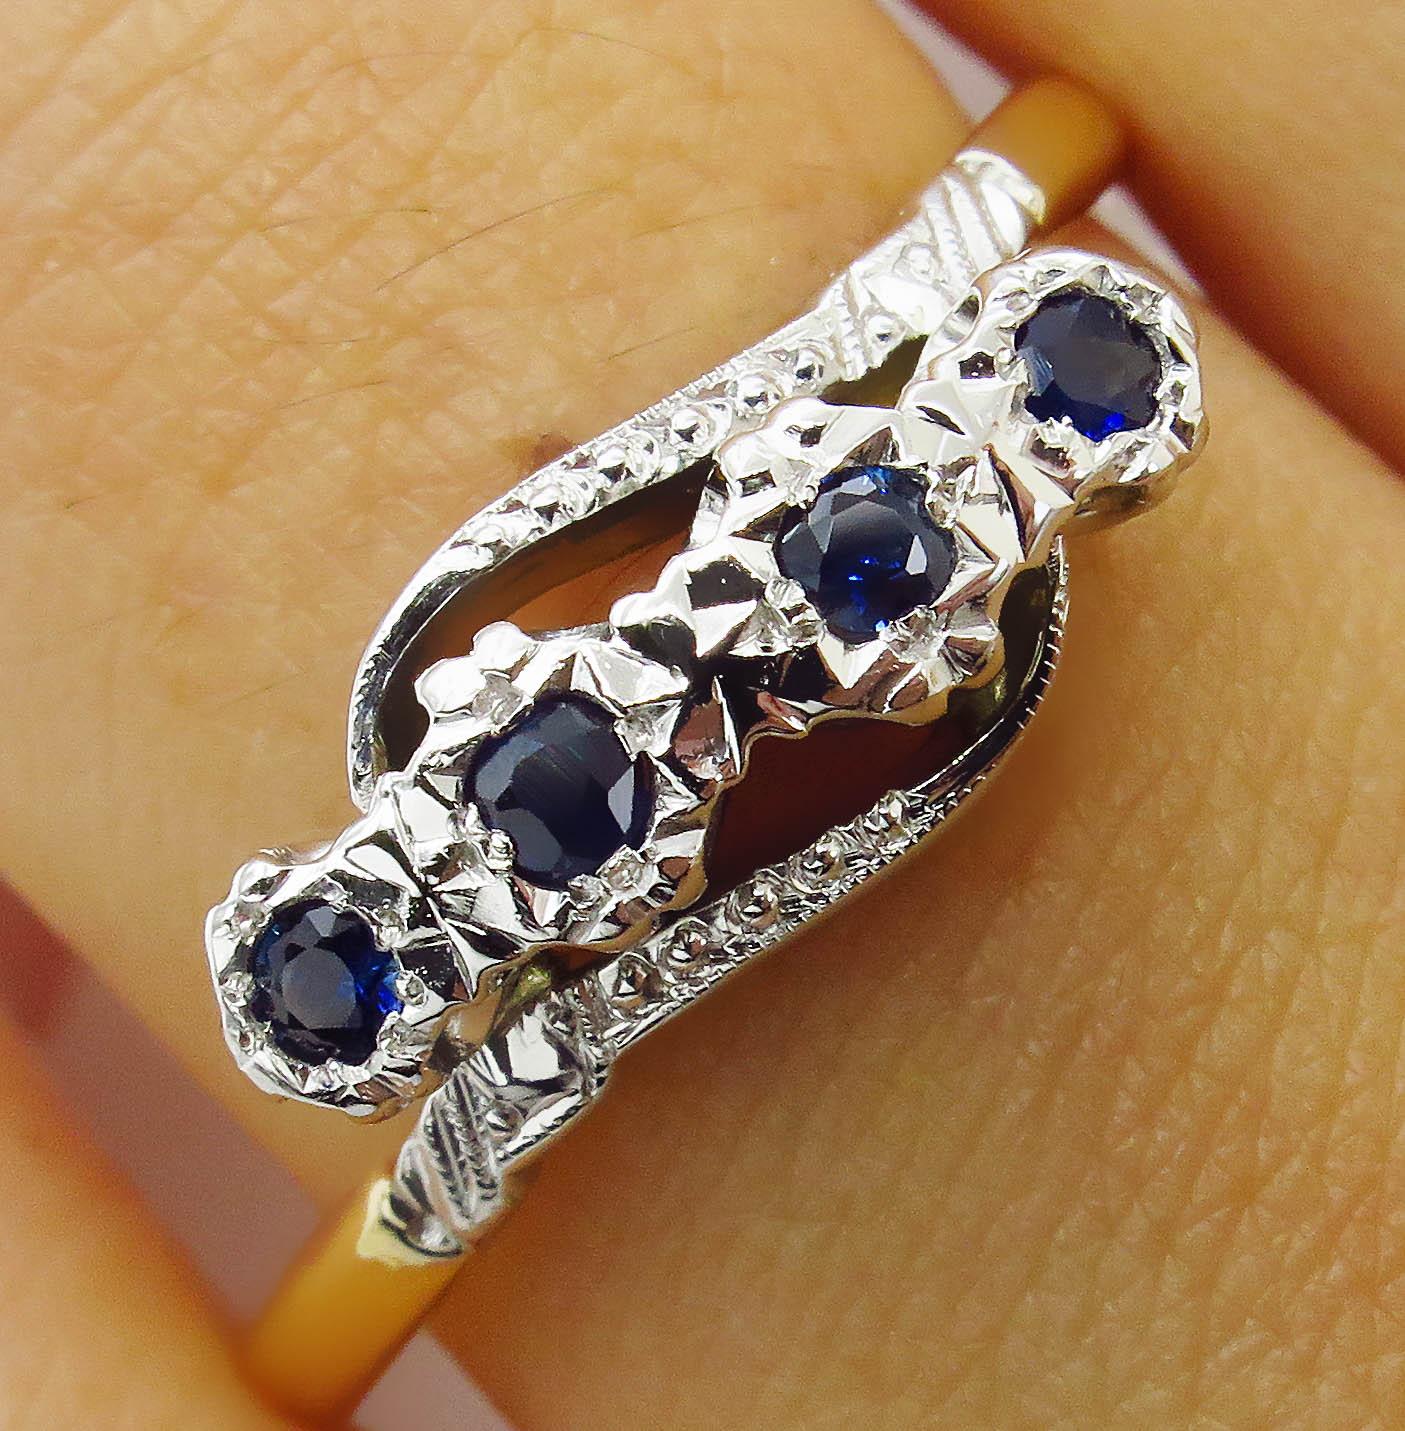 A Timeless Important Antique Victorian 18k Yellow Gold (stamped 18ct) European made Crossover Engagement Ring with 0.18ct total Four Stone Blue Sapphires, set into Platinum Crown.
Classic Solid mounting, finger size 8 1/4, can be re-sized. We offer